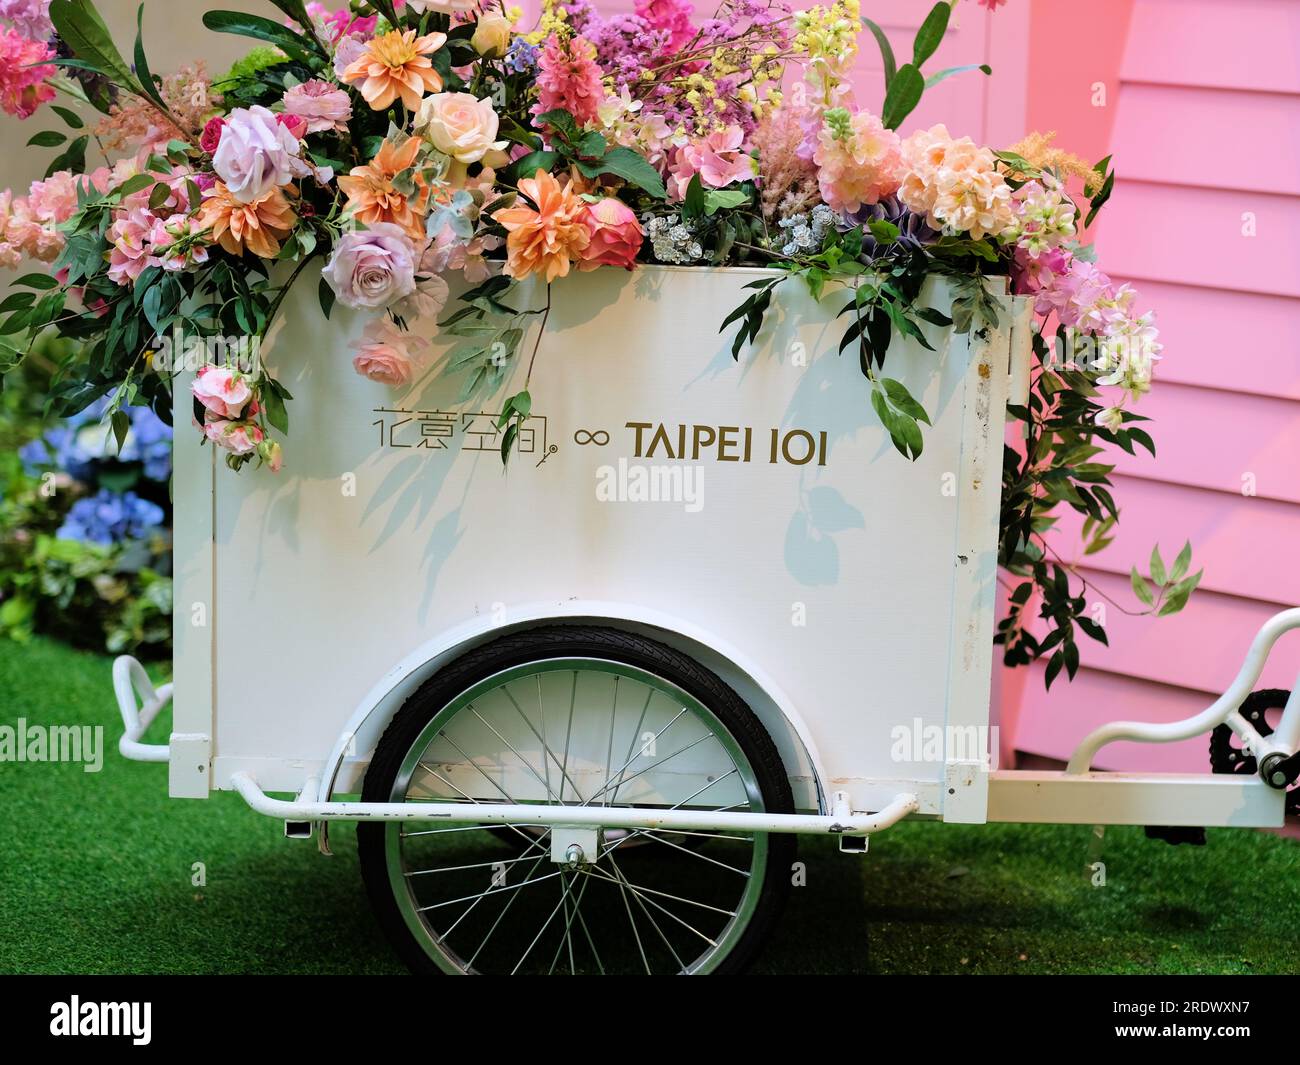 A metal cart attached to a bicycle with artificial flowers decorating a courtyard at Taipei 101 shopping center and mall; Taipei, Taiwan. Stock Photo